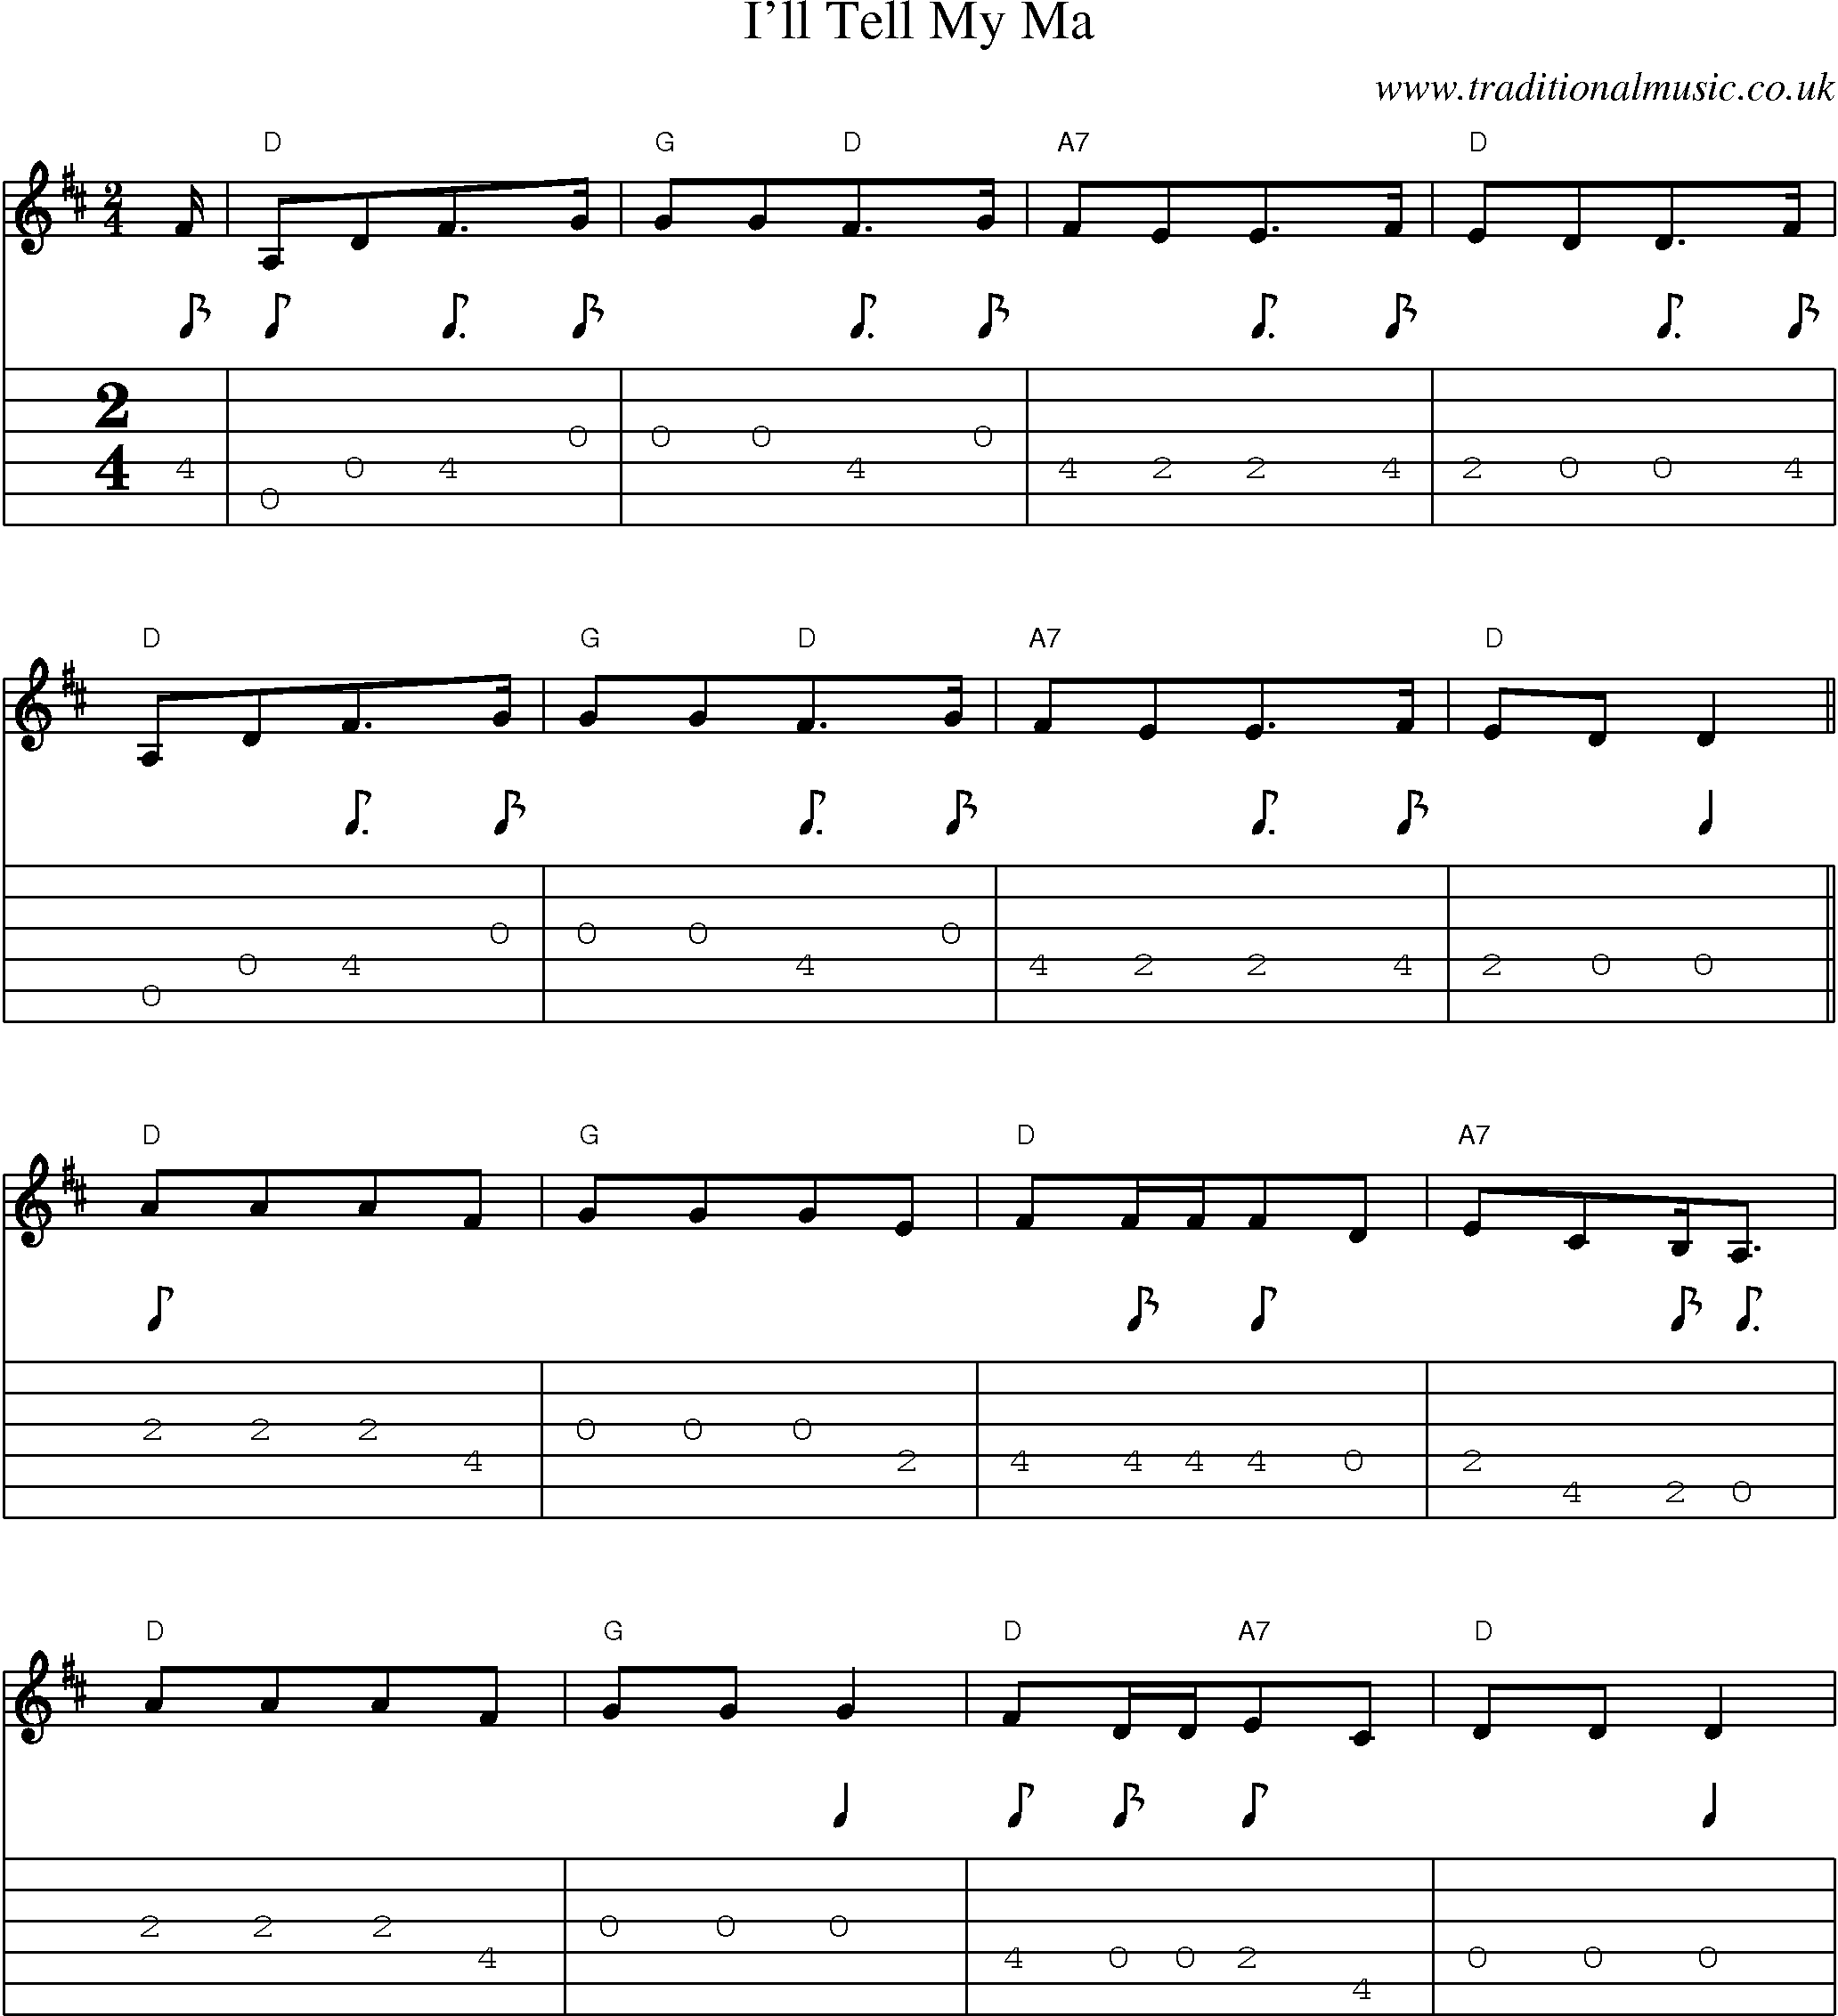 Music Score and Guitar Tabs for Ill Tell My Ma